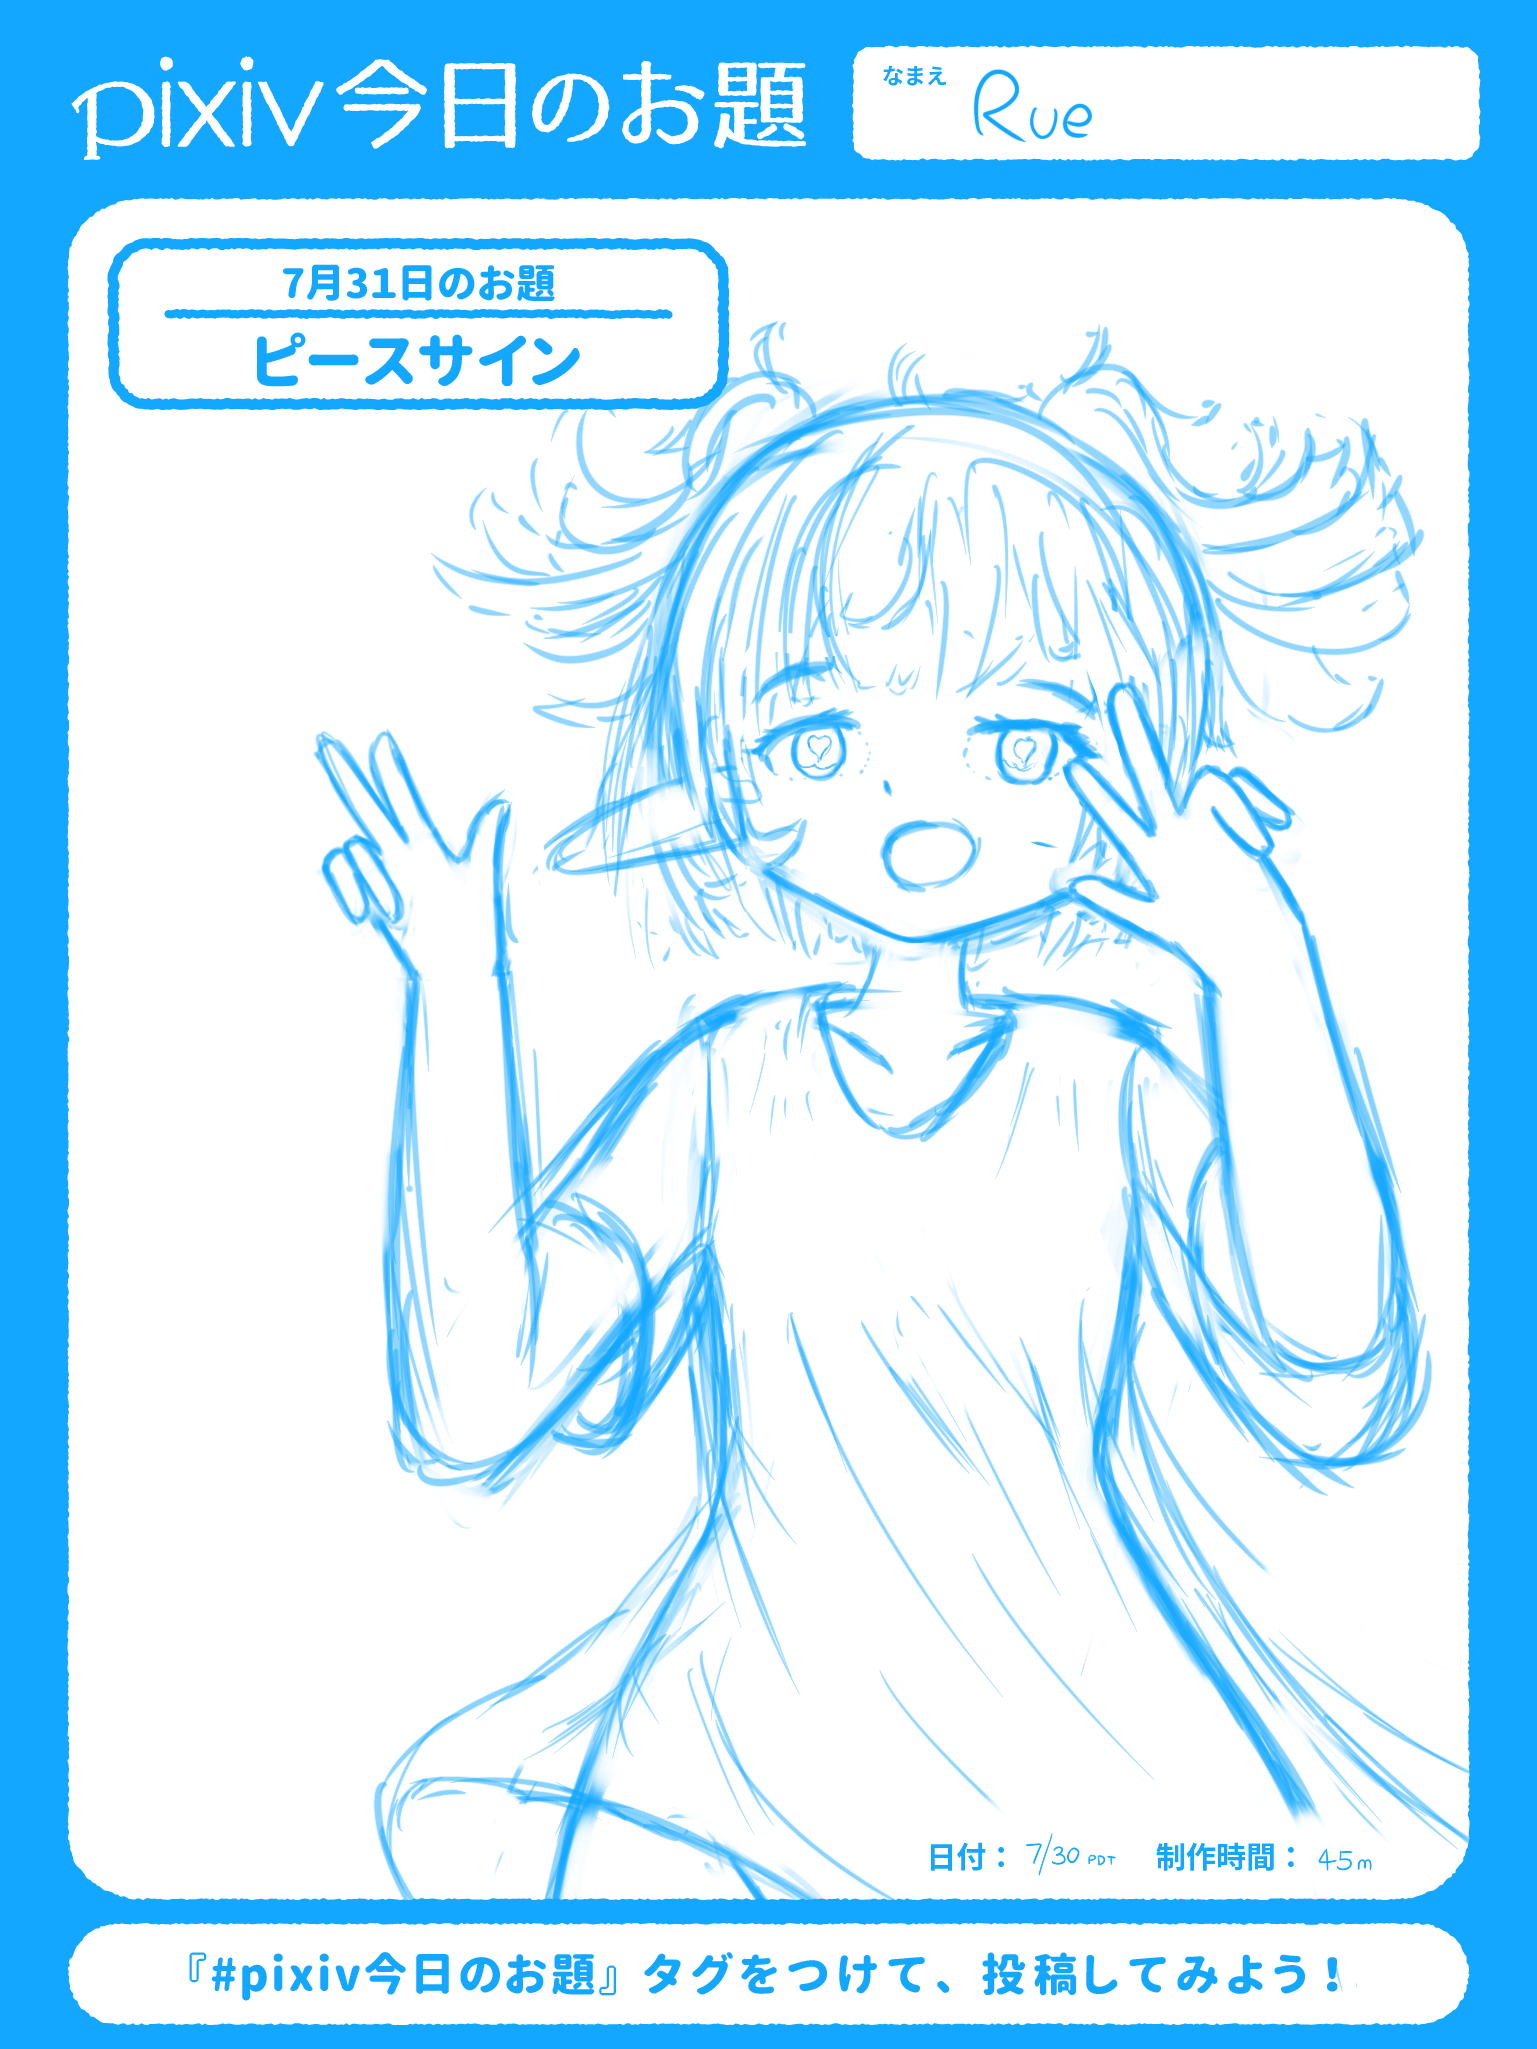 A sketch of me! I’m holding up two peace signs because the Pixiv sensei theme today was peace signs.